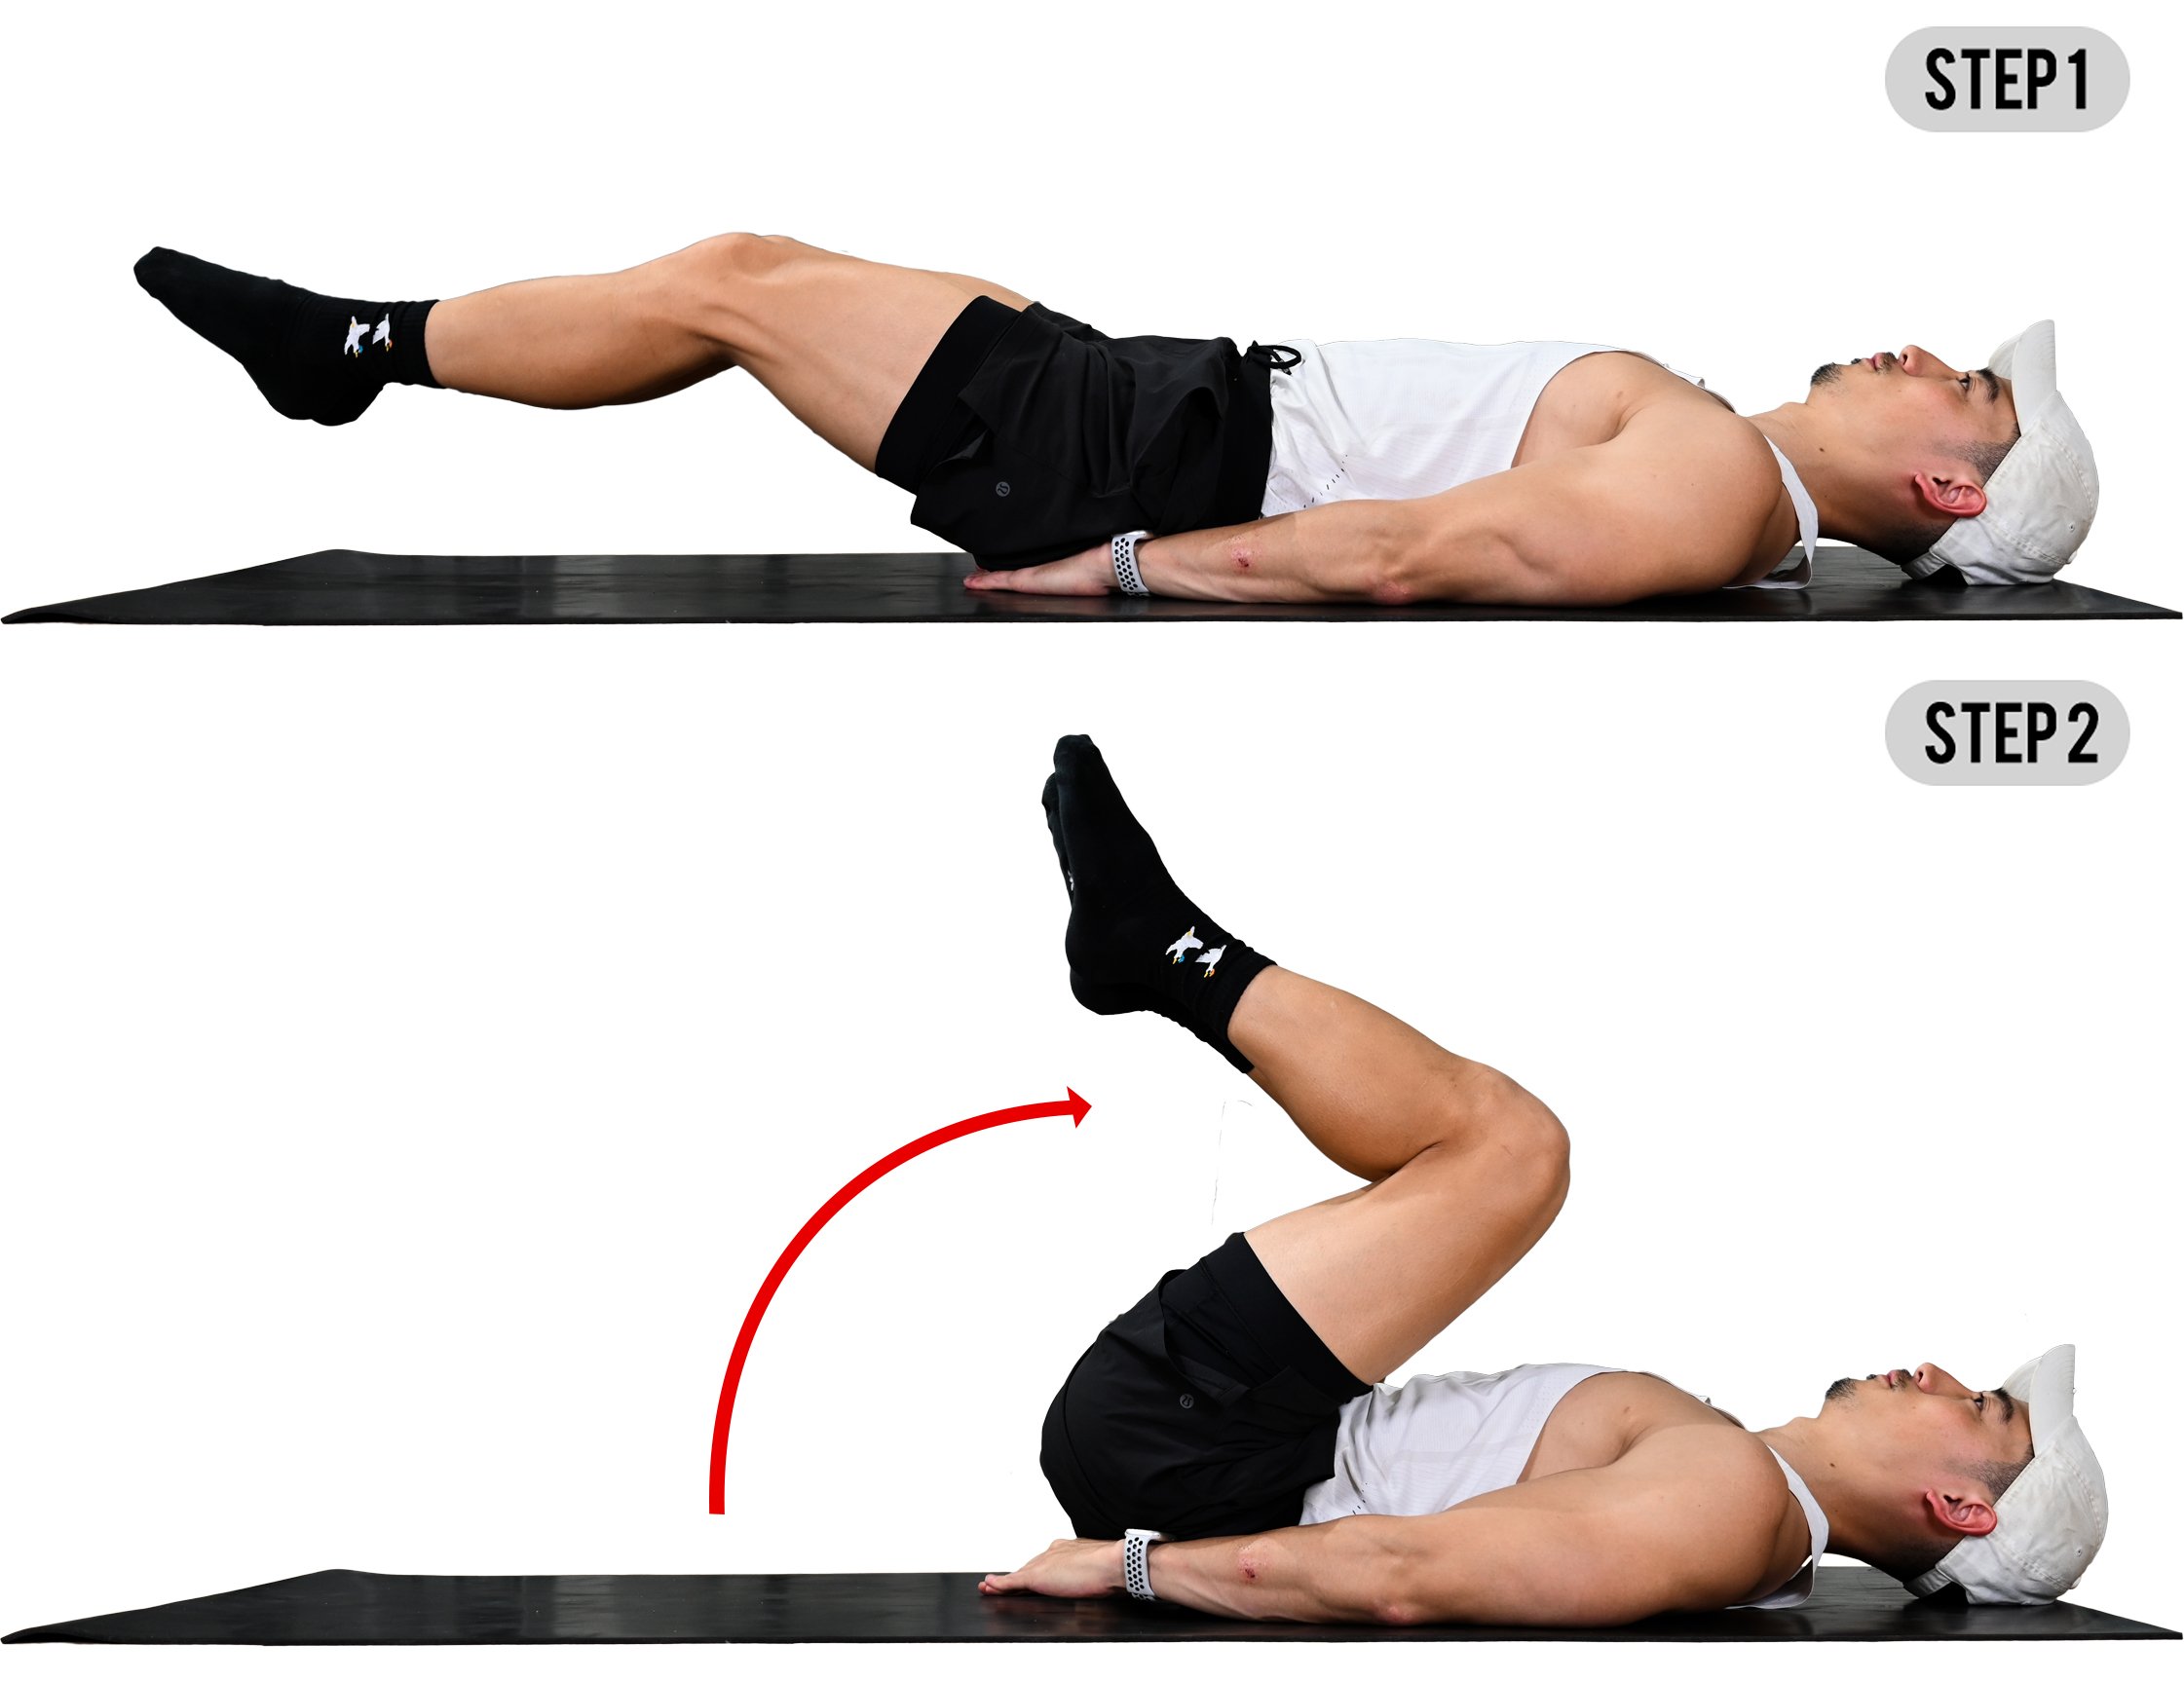 Eight Rectus Abdominis Muscle Workouts for those aiming for a six-pack.